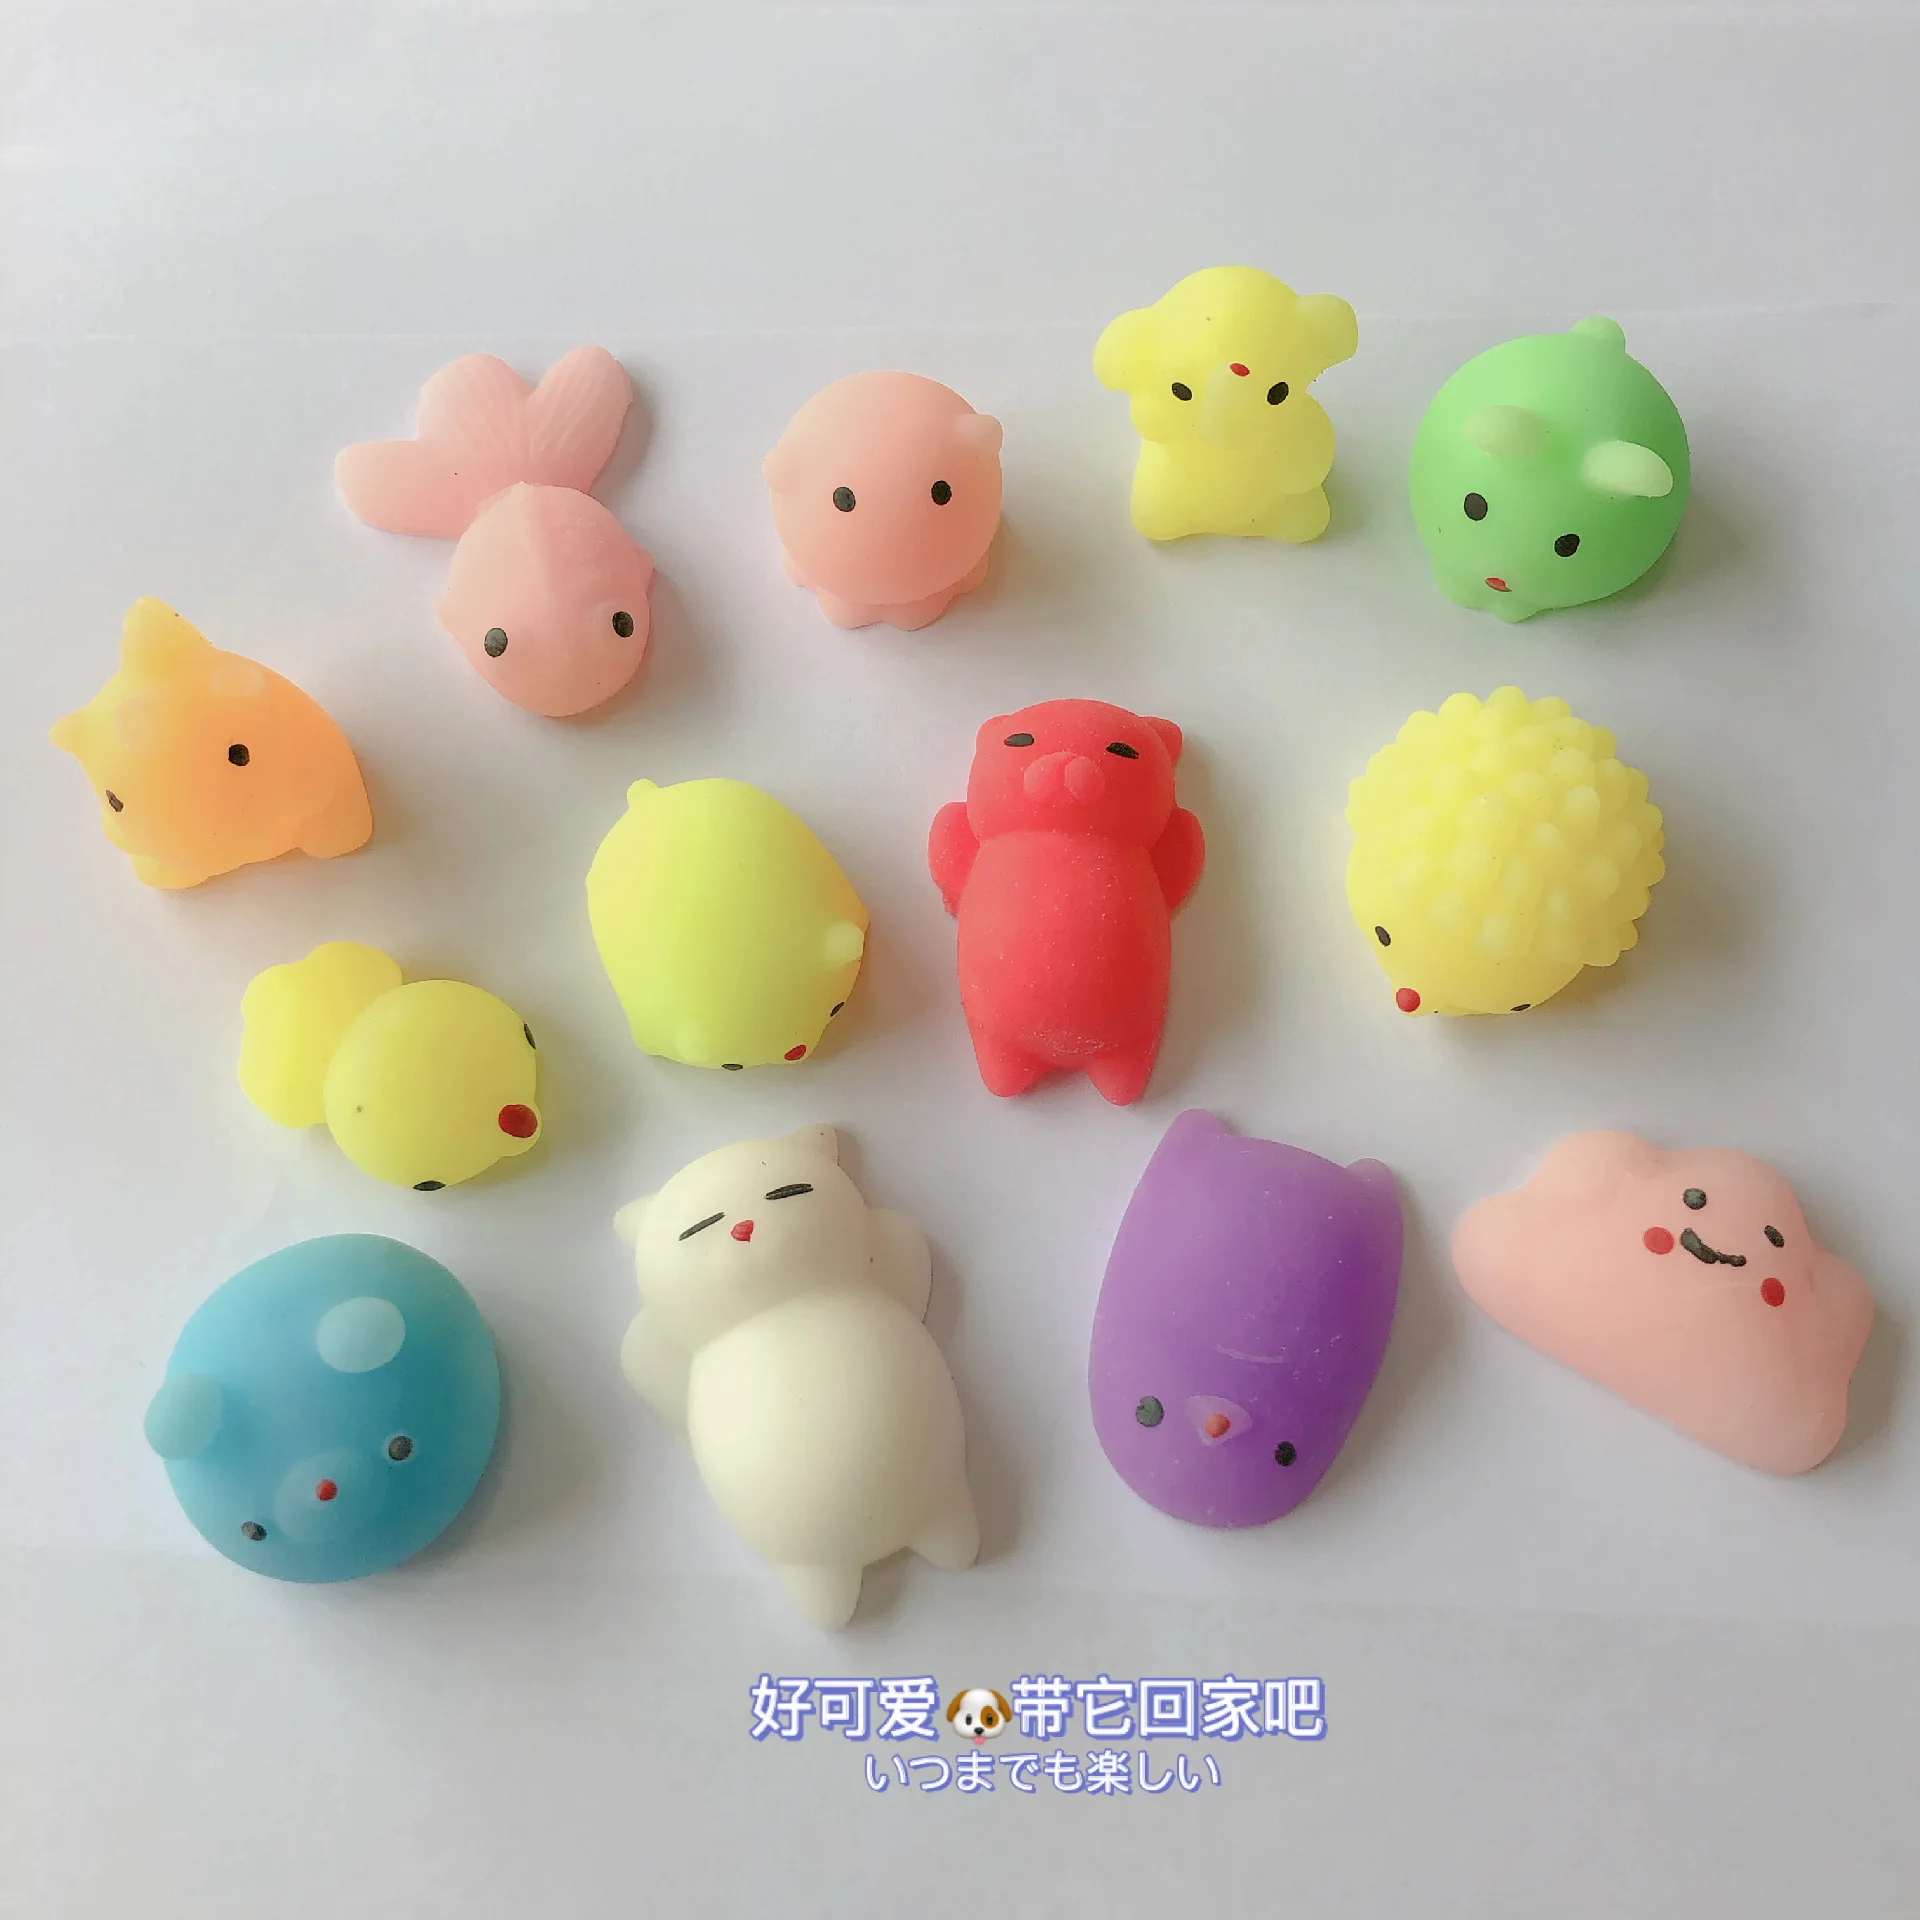 Buy Promotional 3pcs cute animals random delivery pinch music toys to decompress and vent emotions kawaii rabbit panda on